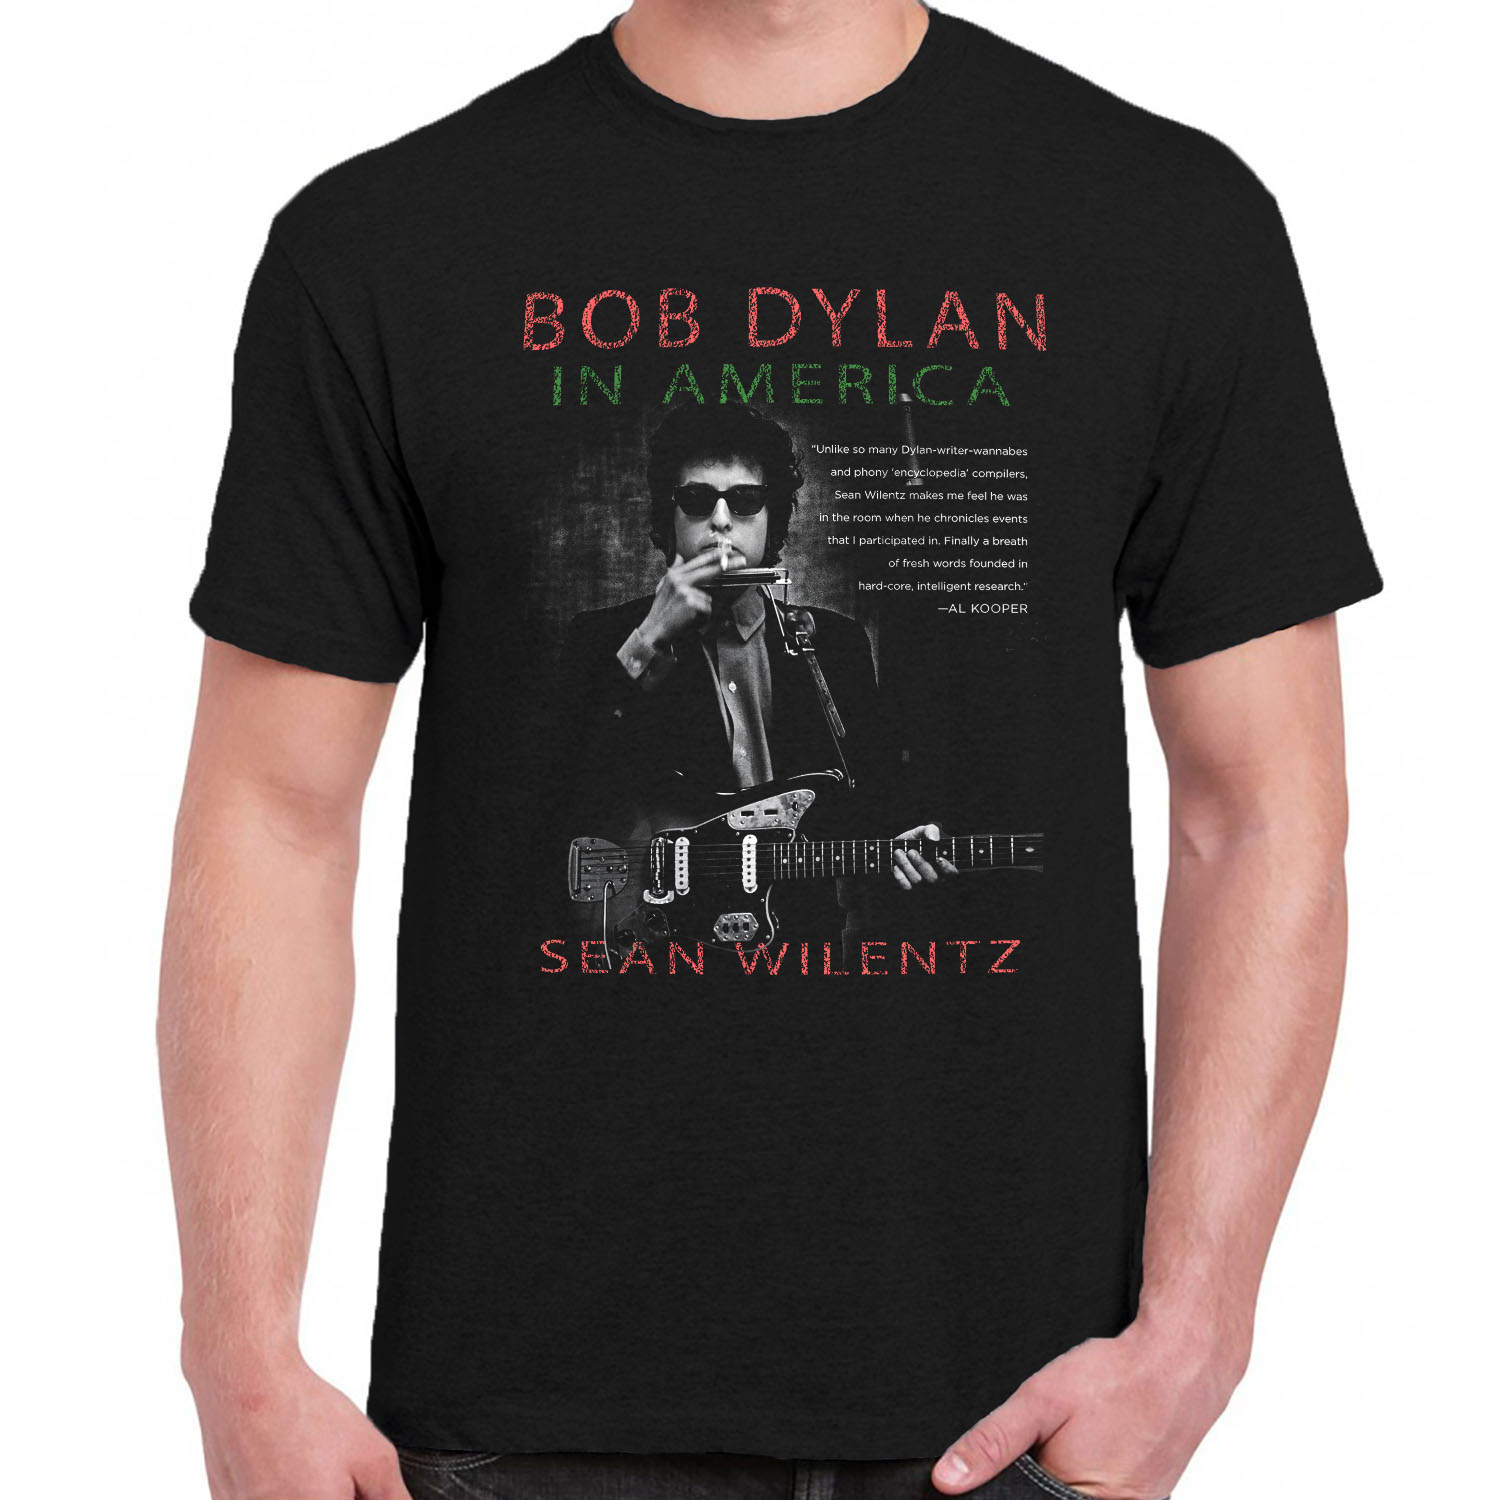 Lucky Brand Vintage Bob Dylan Concert T-shirt Size S Made in USA